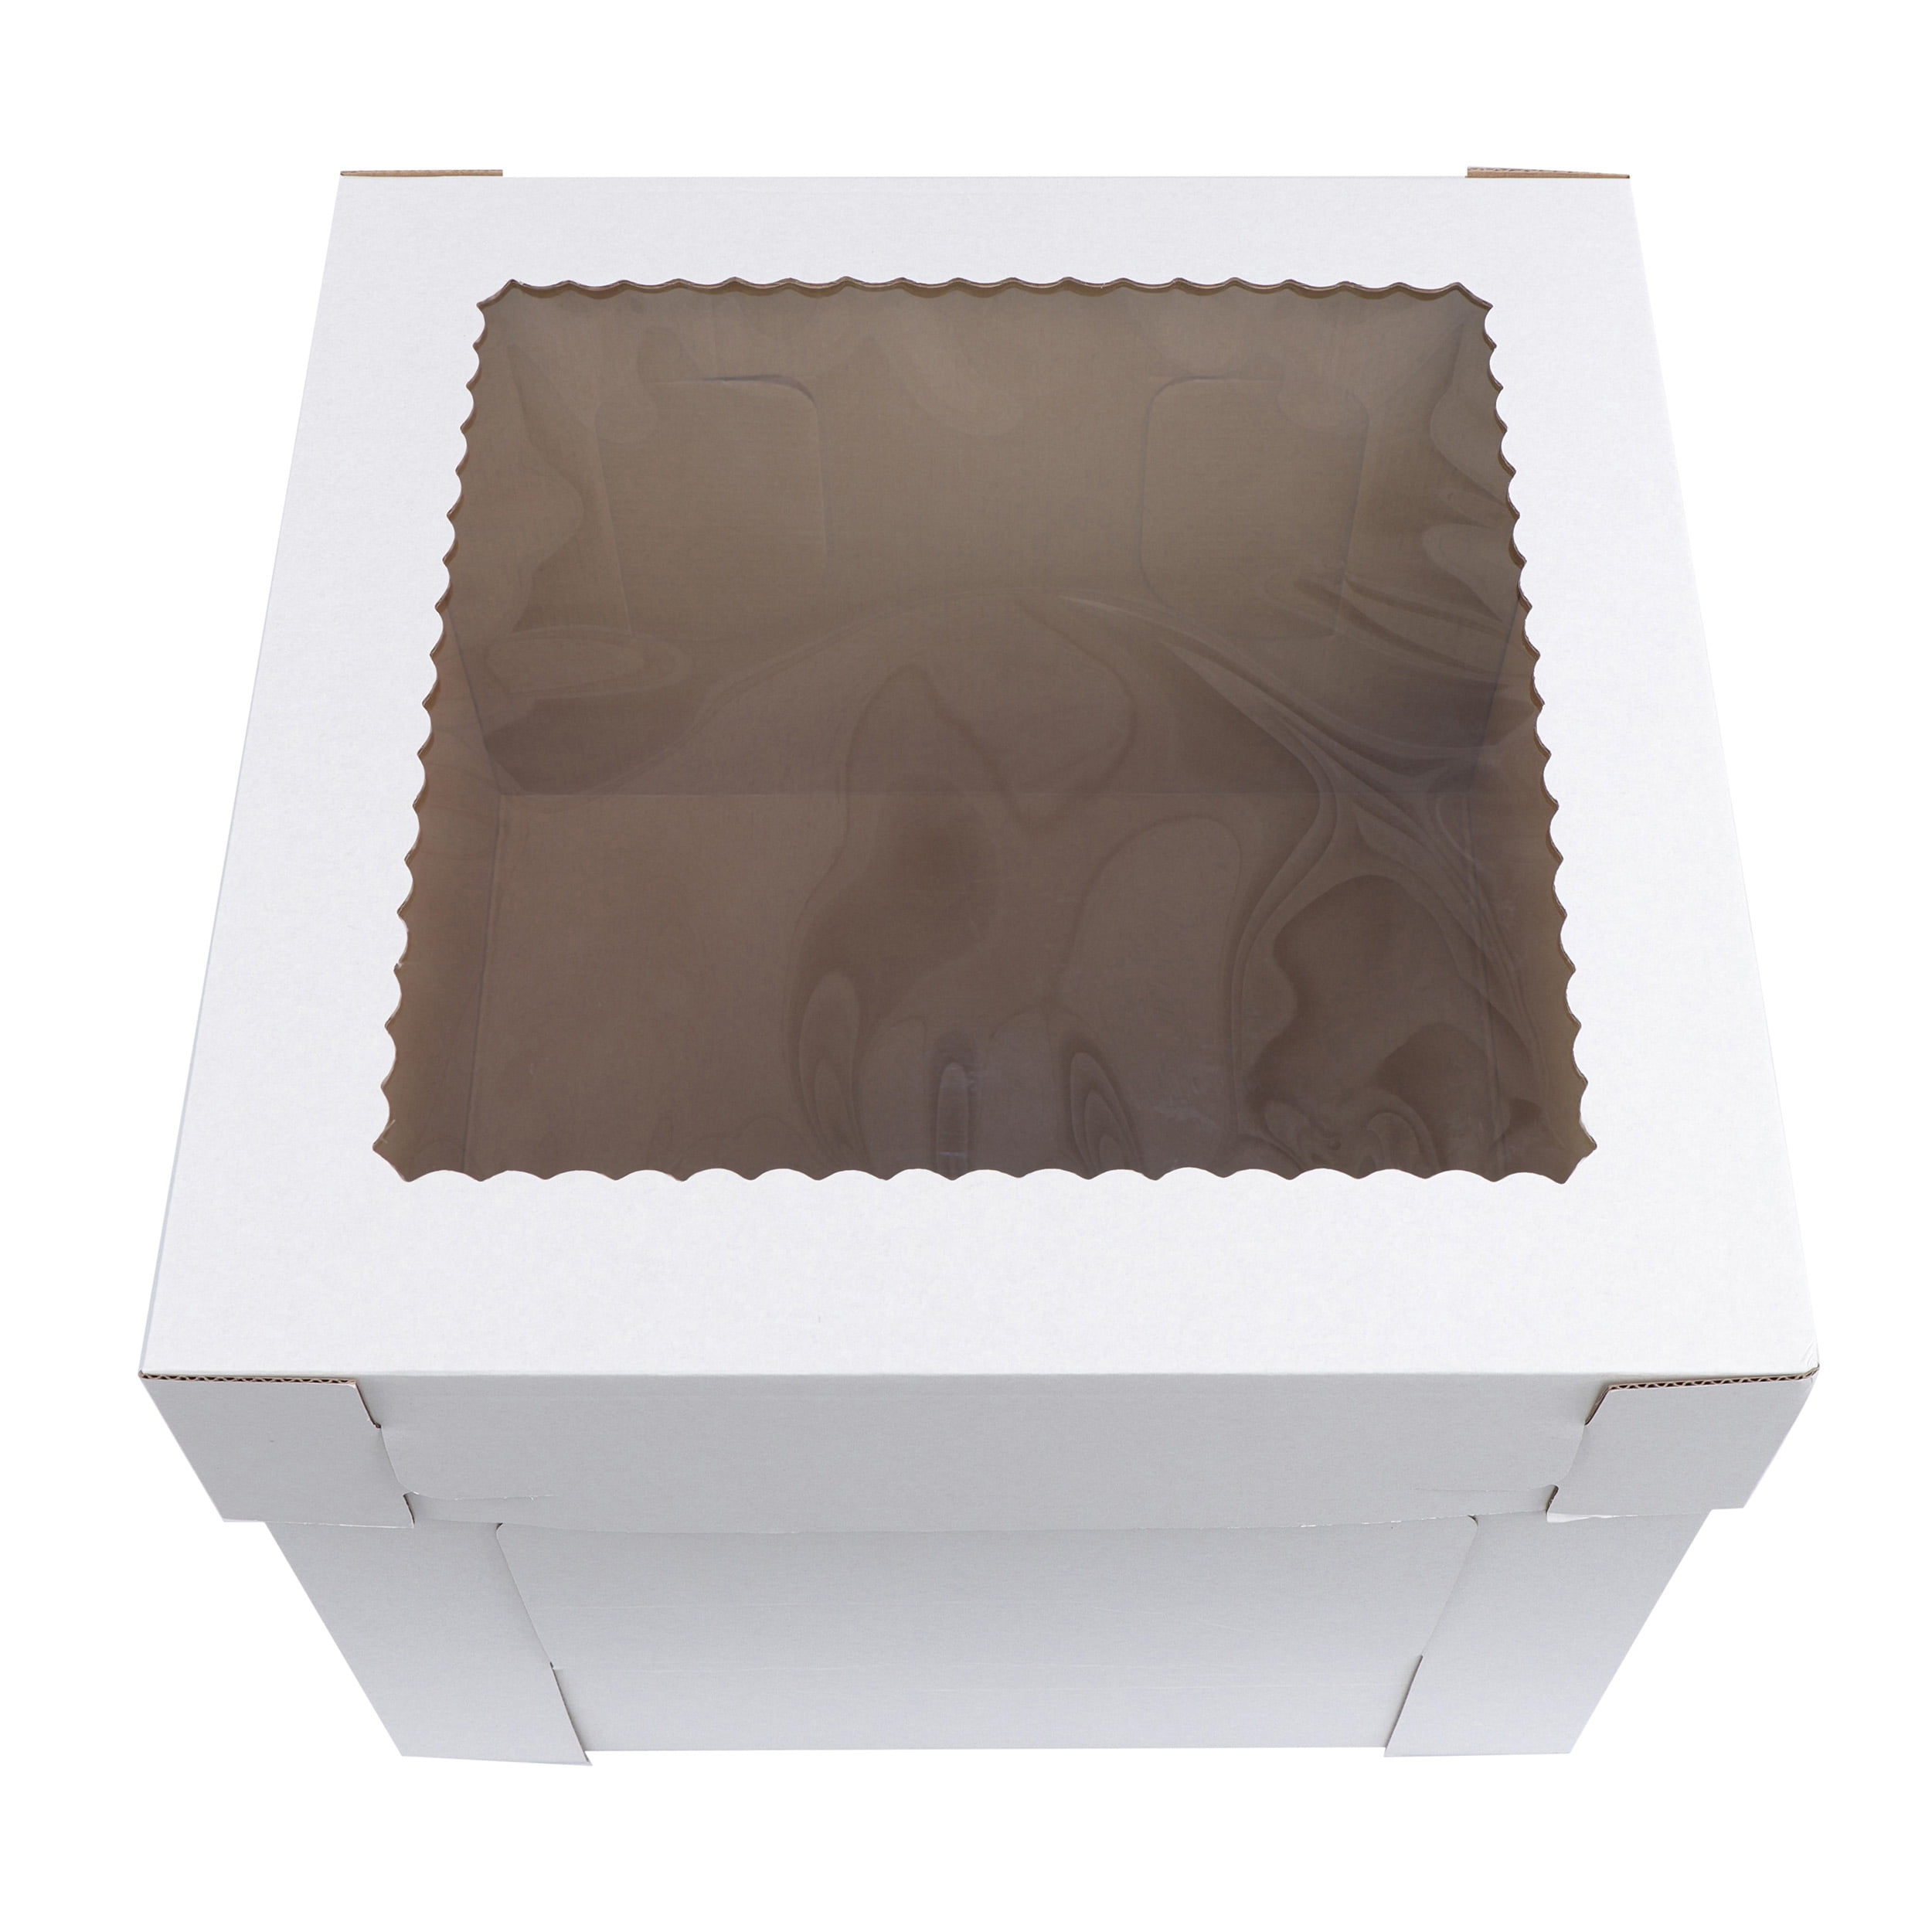 10 Pack] Tall Cake Boxes for Tier Cakes, 10x10x14 Cake Box with Window,  Gr... | eBay